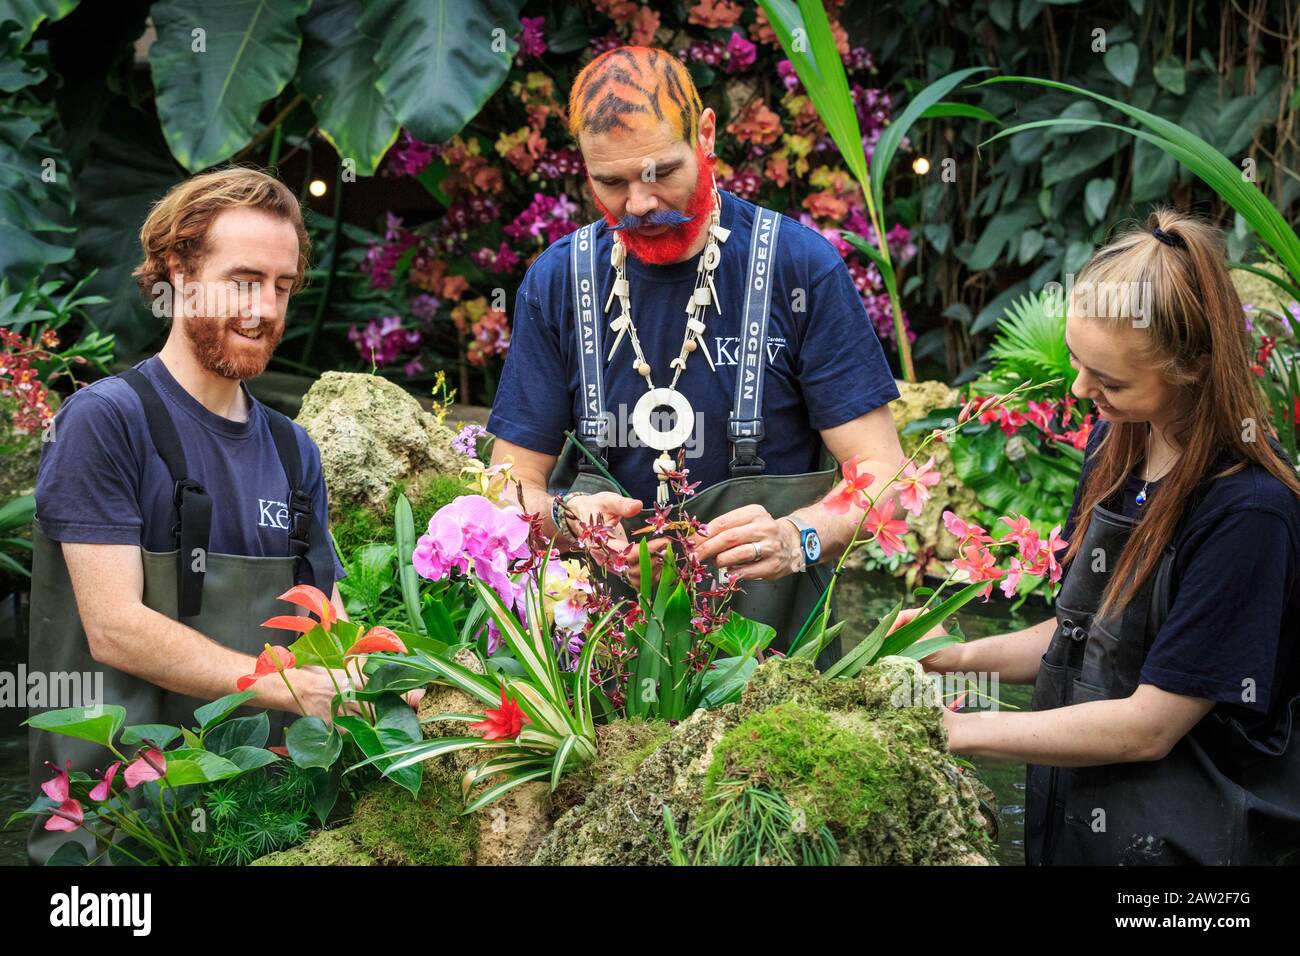 Kew Gardens, London, 06th Feb 2020. Left to right: Diploma student Neil Alderson, Kew volunteer Henck Roeling and Kew apprentice Jenny Crabb tend to the delicate flowers. The annual Kew Orchid Festival at Royal Botanical Gardens in Kew is this year themed around the wonders of Indonesia. The dazzling display showcases Indonesia's plant diversity and wildlife at the Princess of Wales Conservatory. It will be open to the public 8th February - 8th March, 2020. Stock Photo